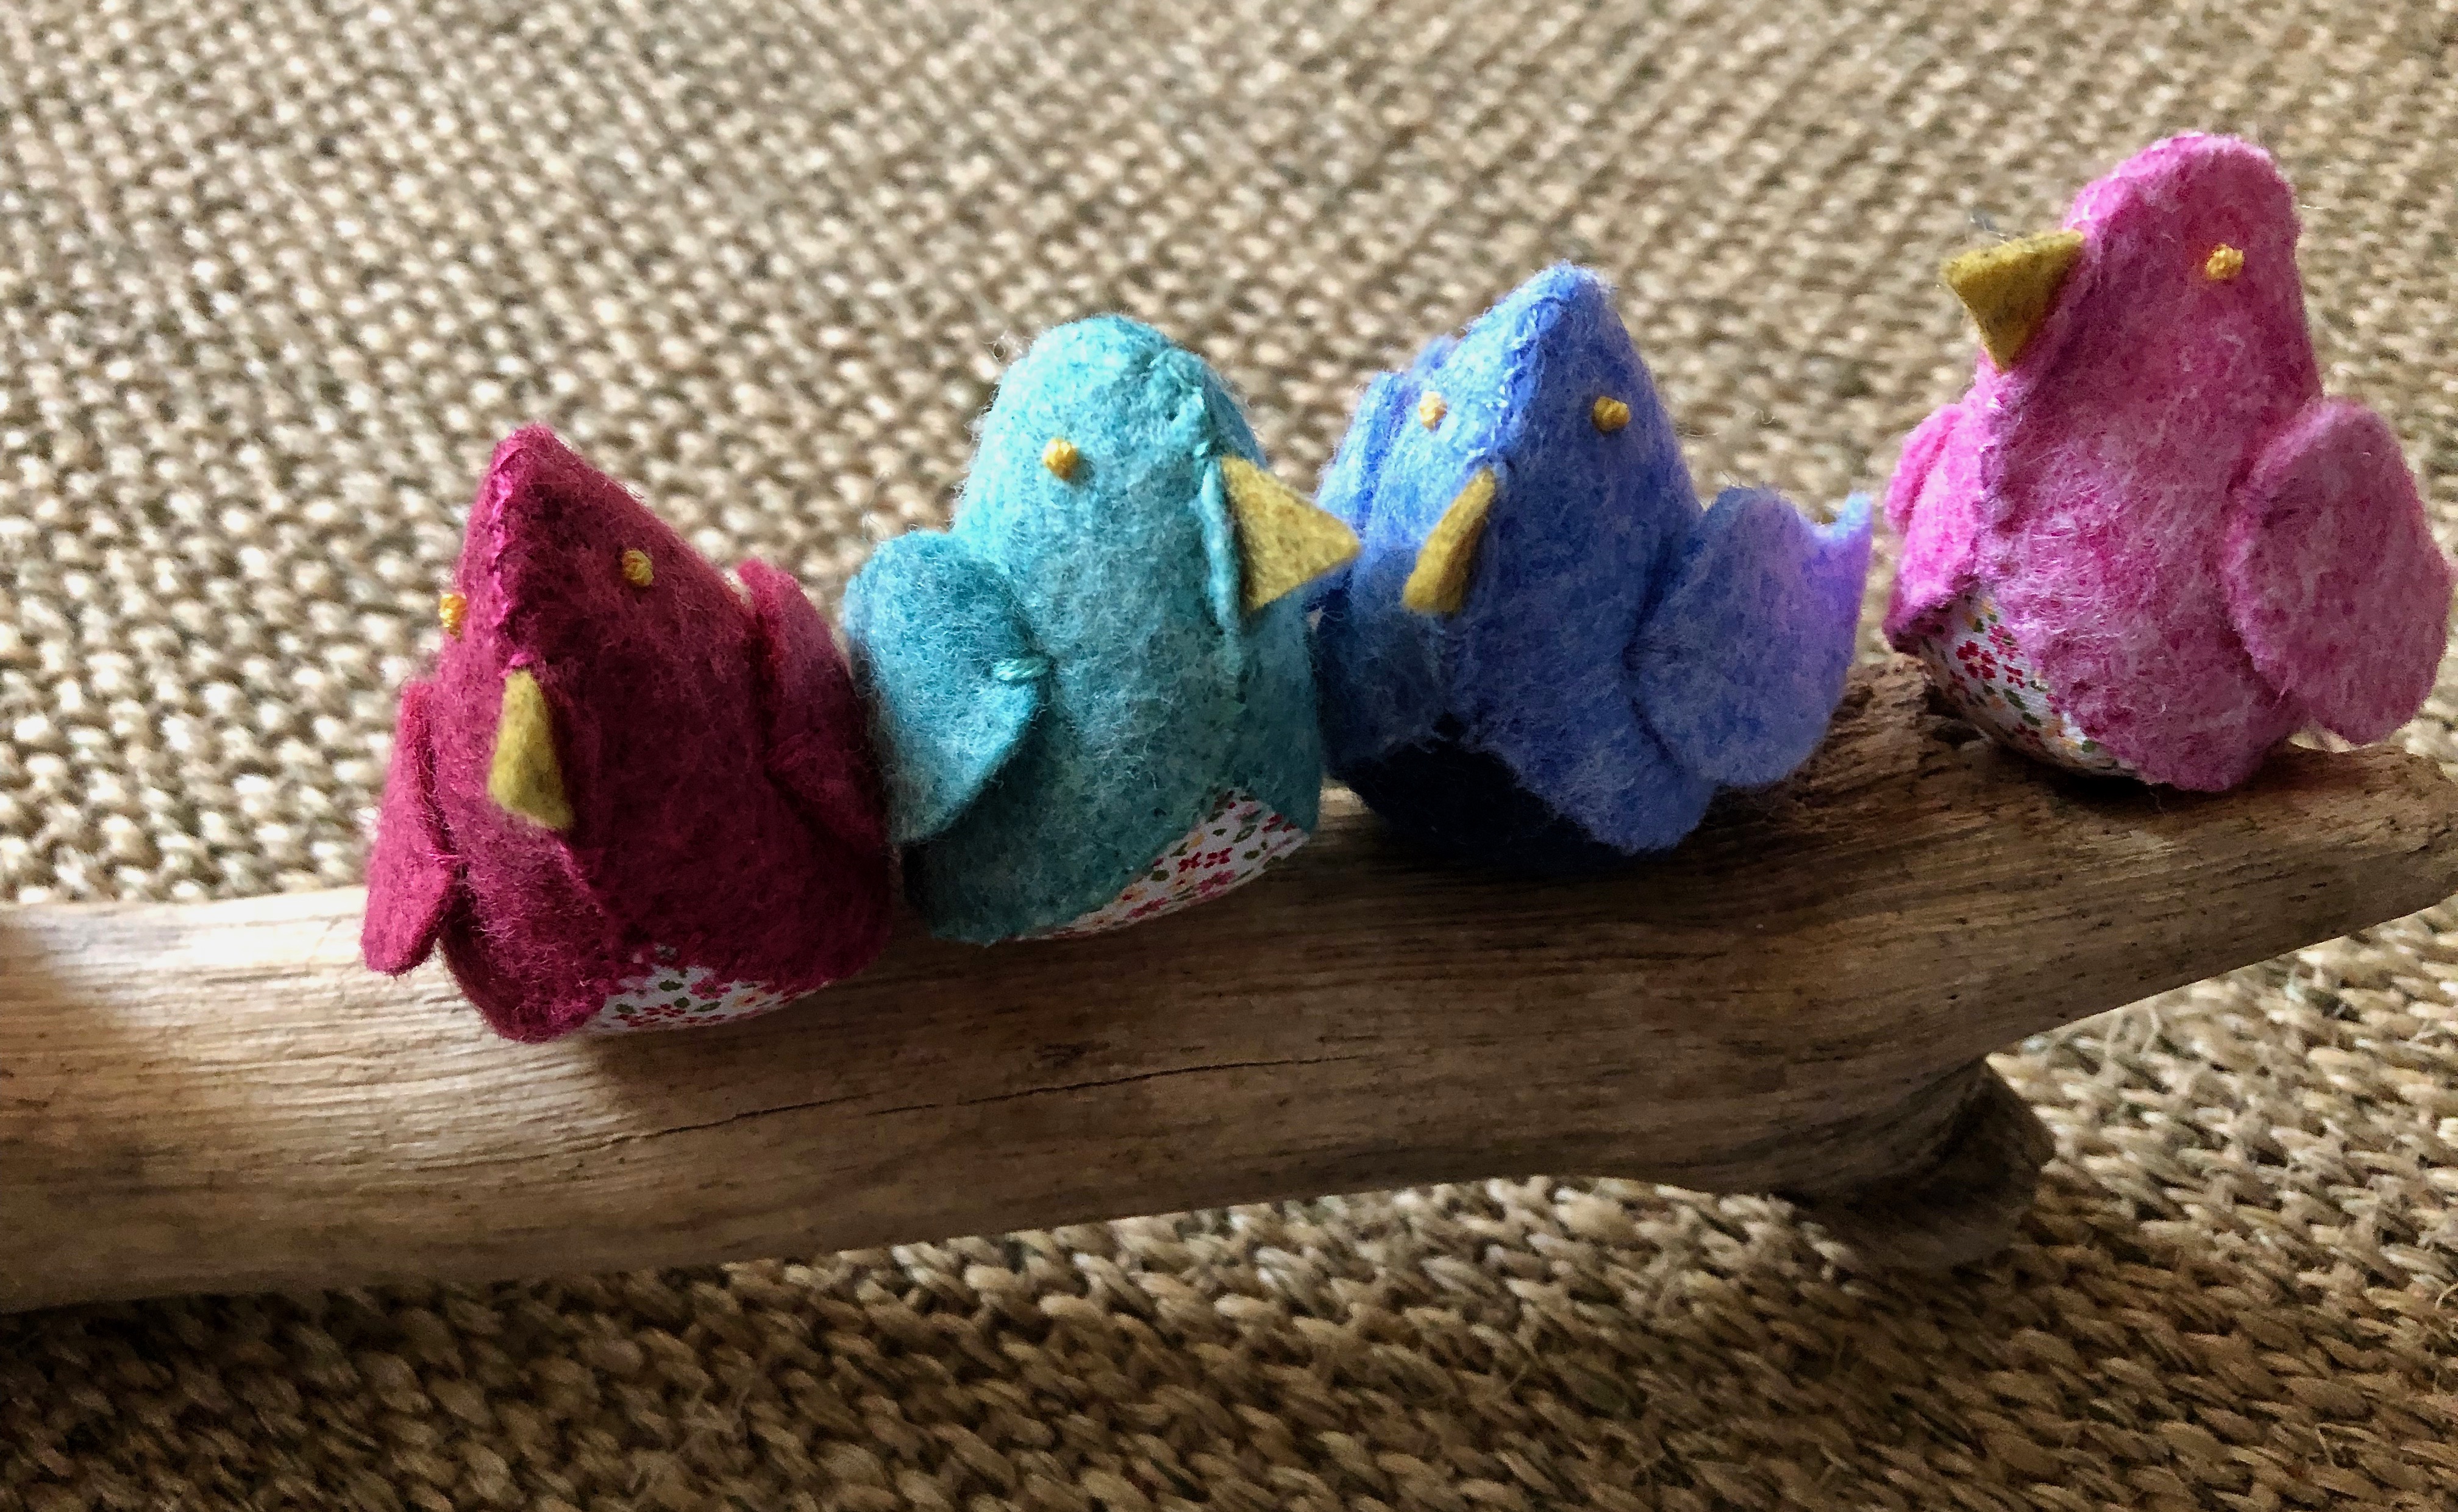 A family of 6 handmade and hand stitched felt and fabric birds sat on a drift wood log. Birds are made in a range of complimentary pastel shades of blue, green and pink with tiny flower fabric chests or wings.